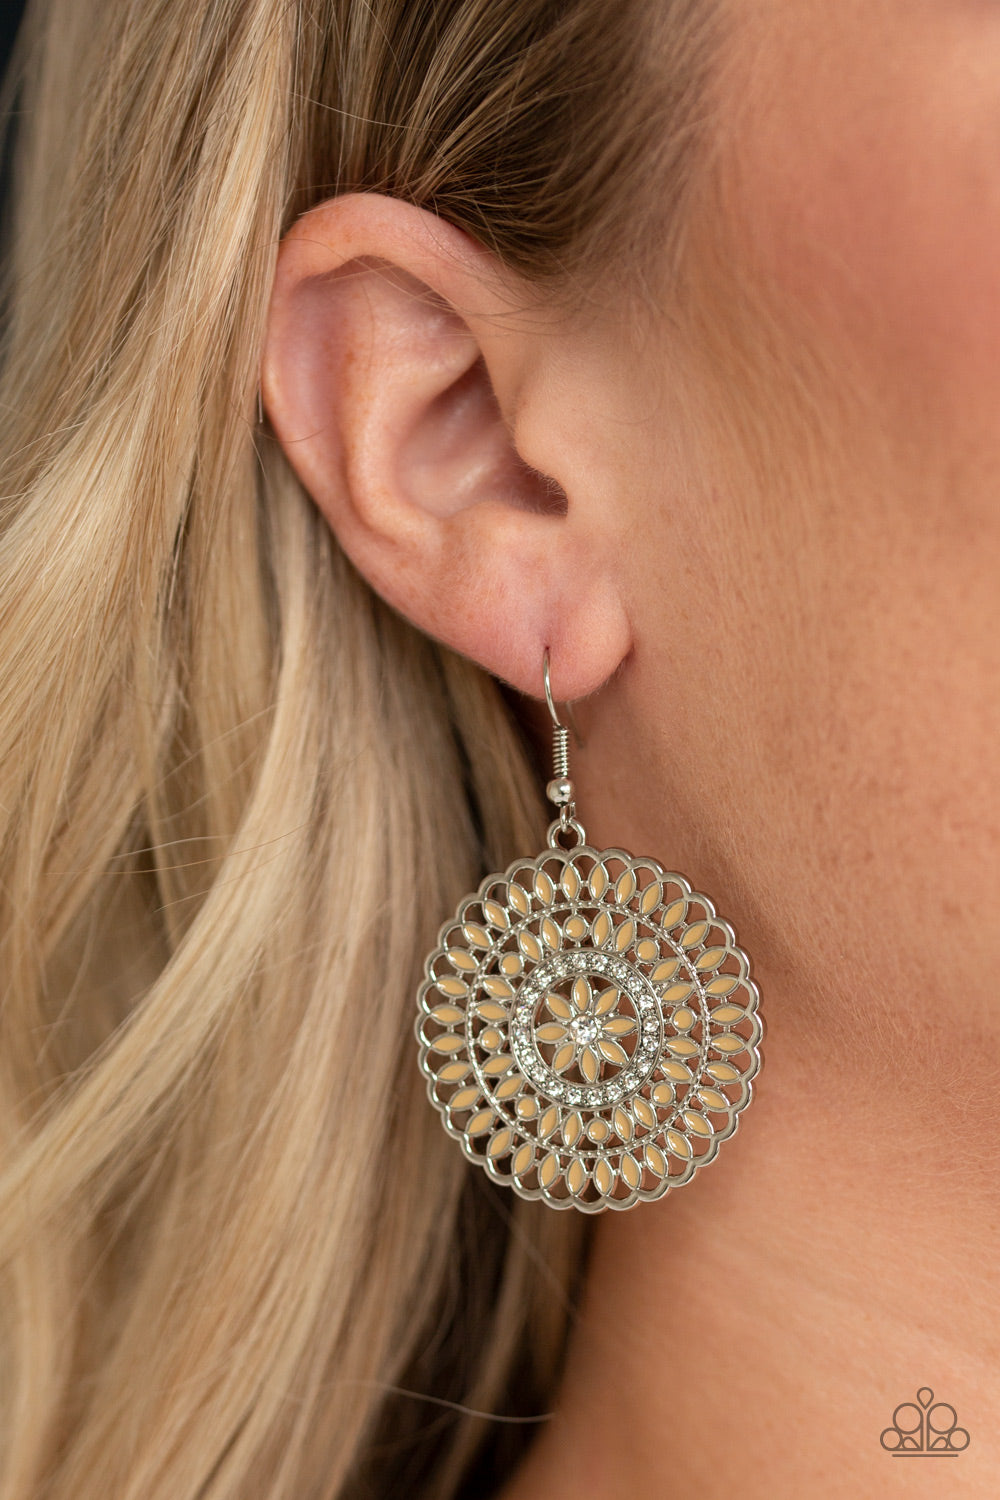 Paparazzi Accessories - PINWHEEL and Deal - Brown Earrings